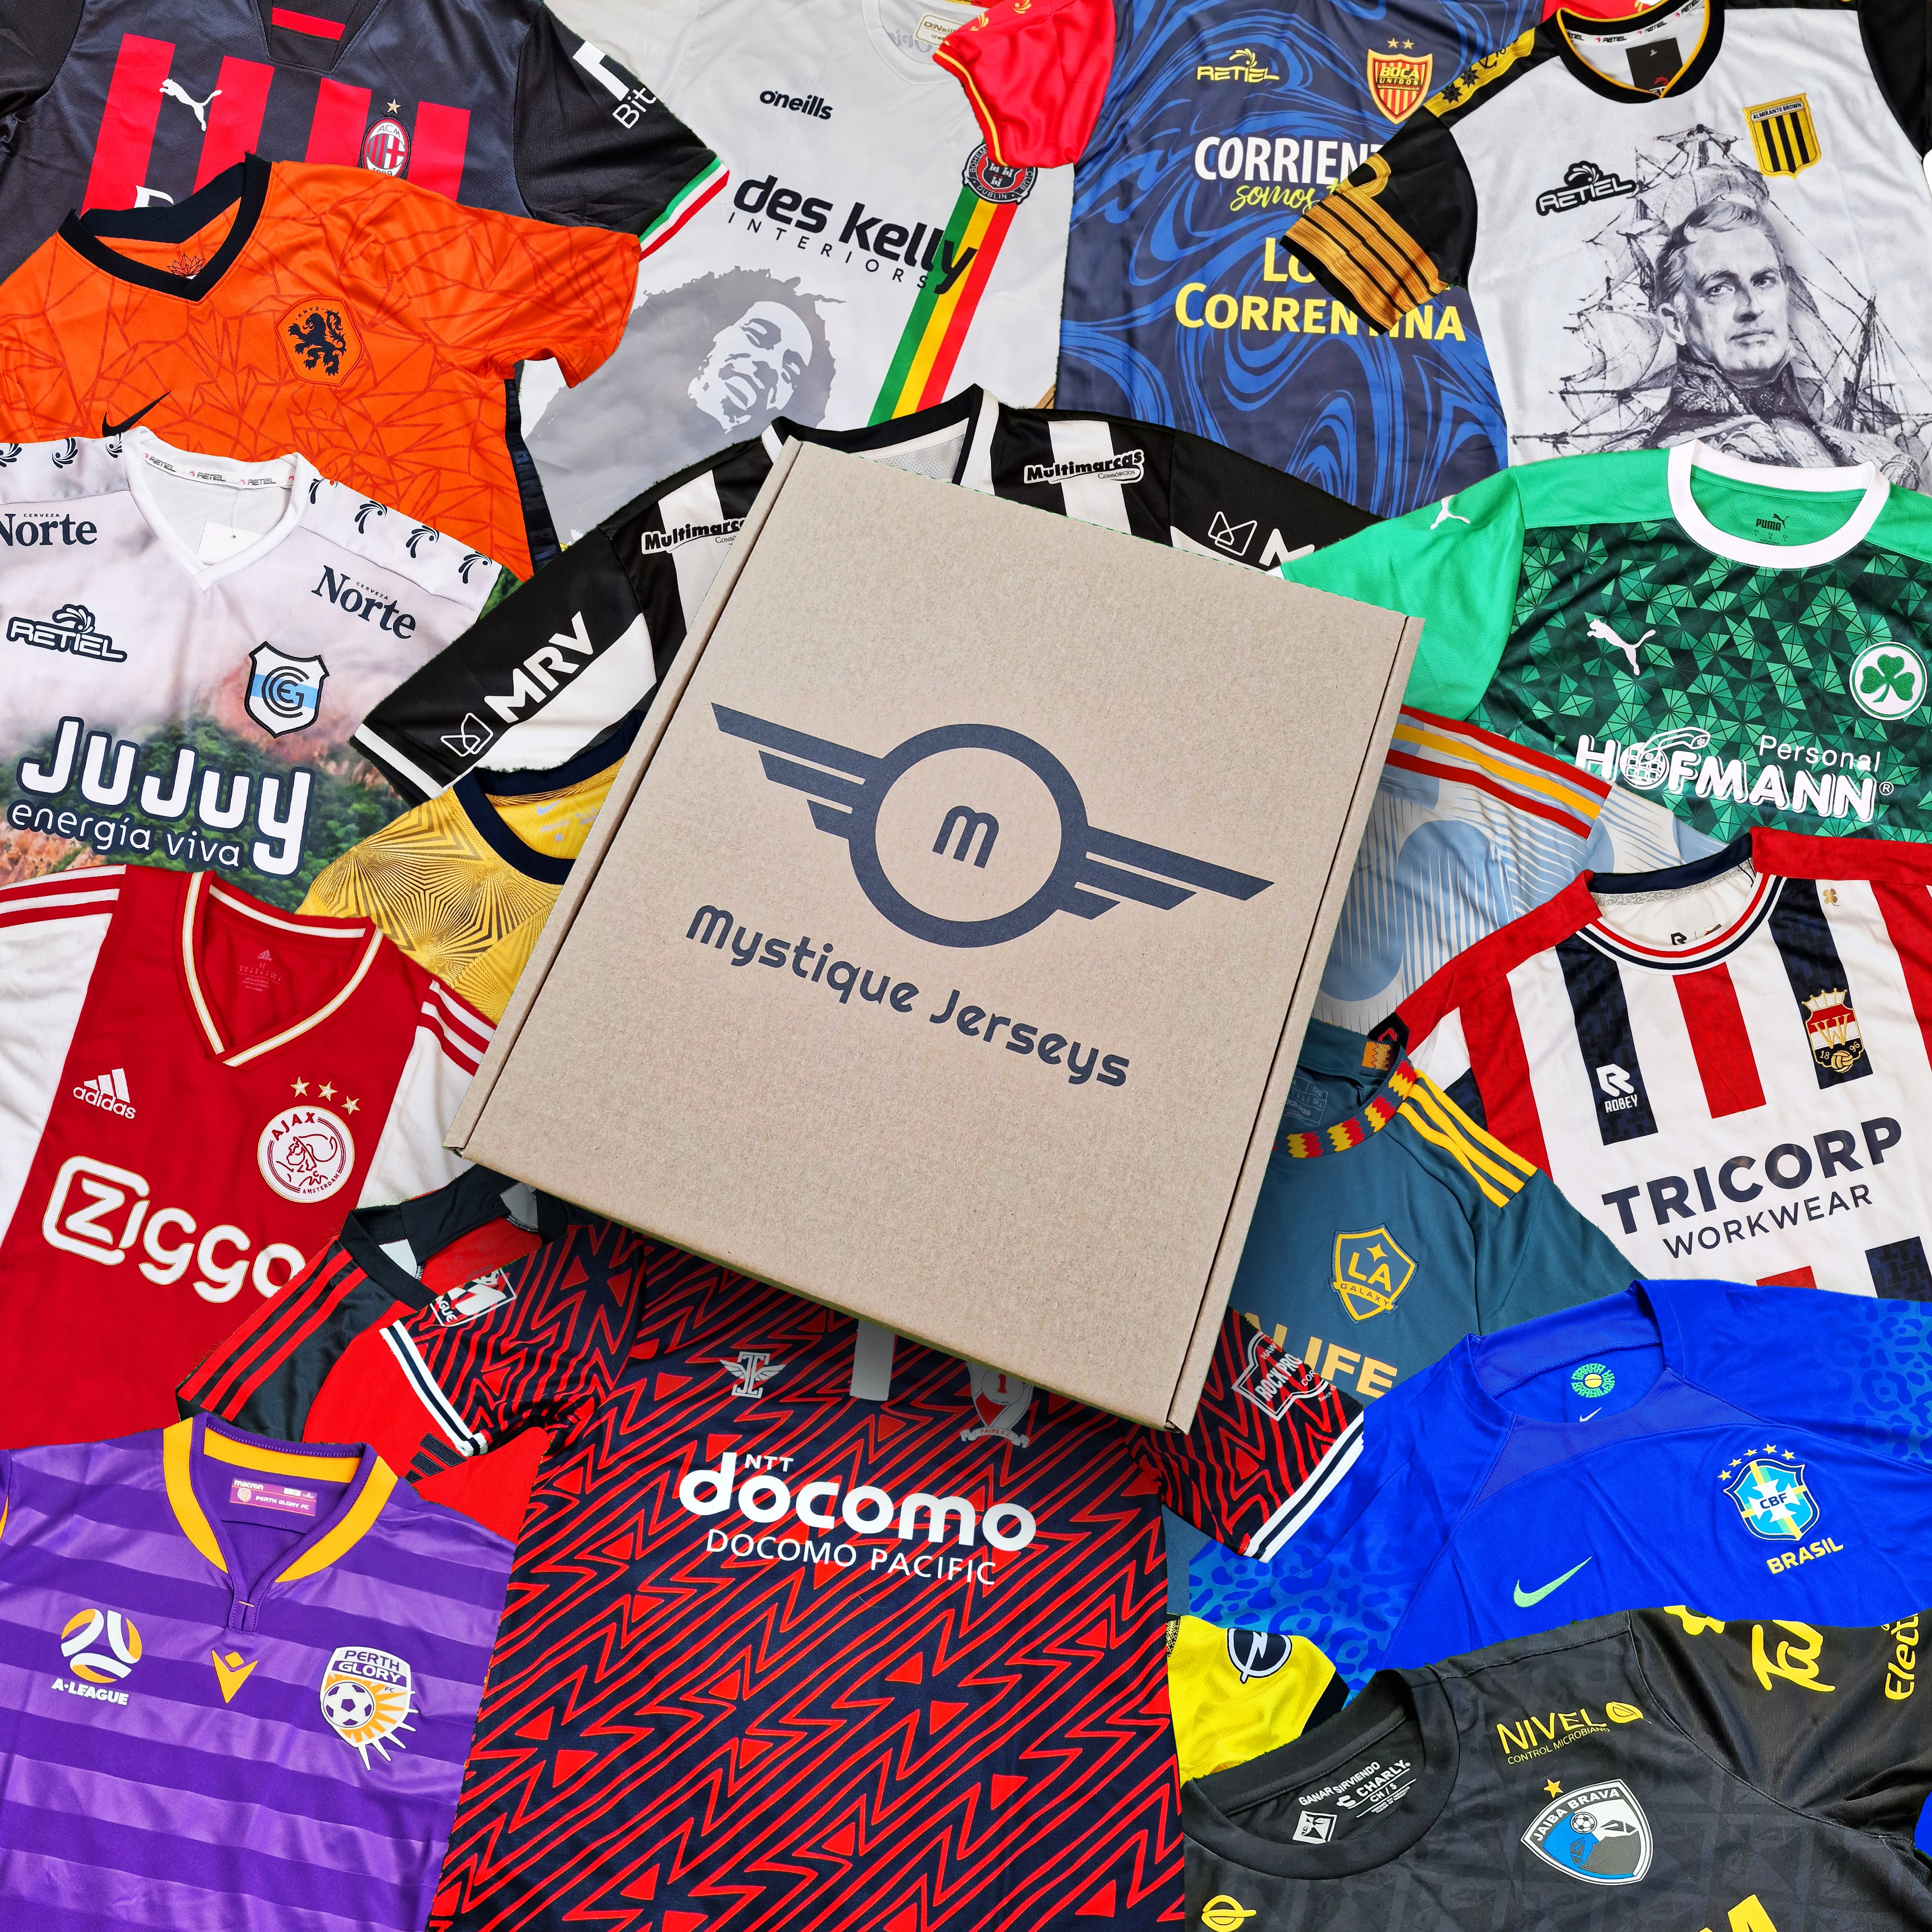 Standard Mystery Football Shirt: Random selection from global teams. 100% authentic.